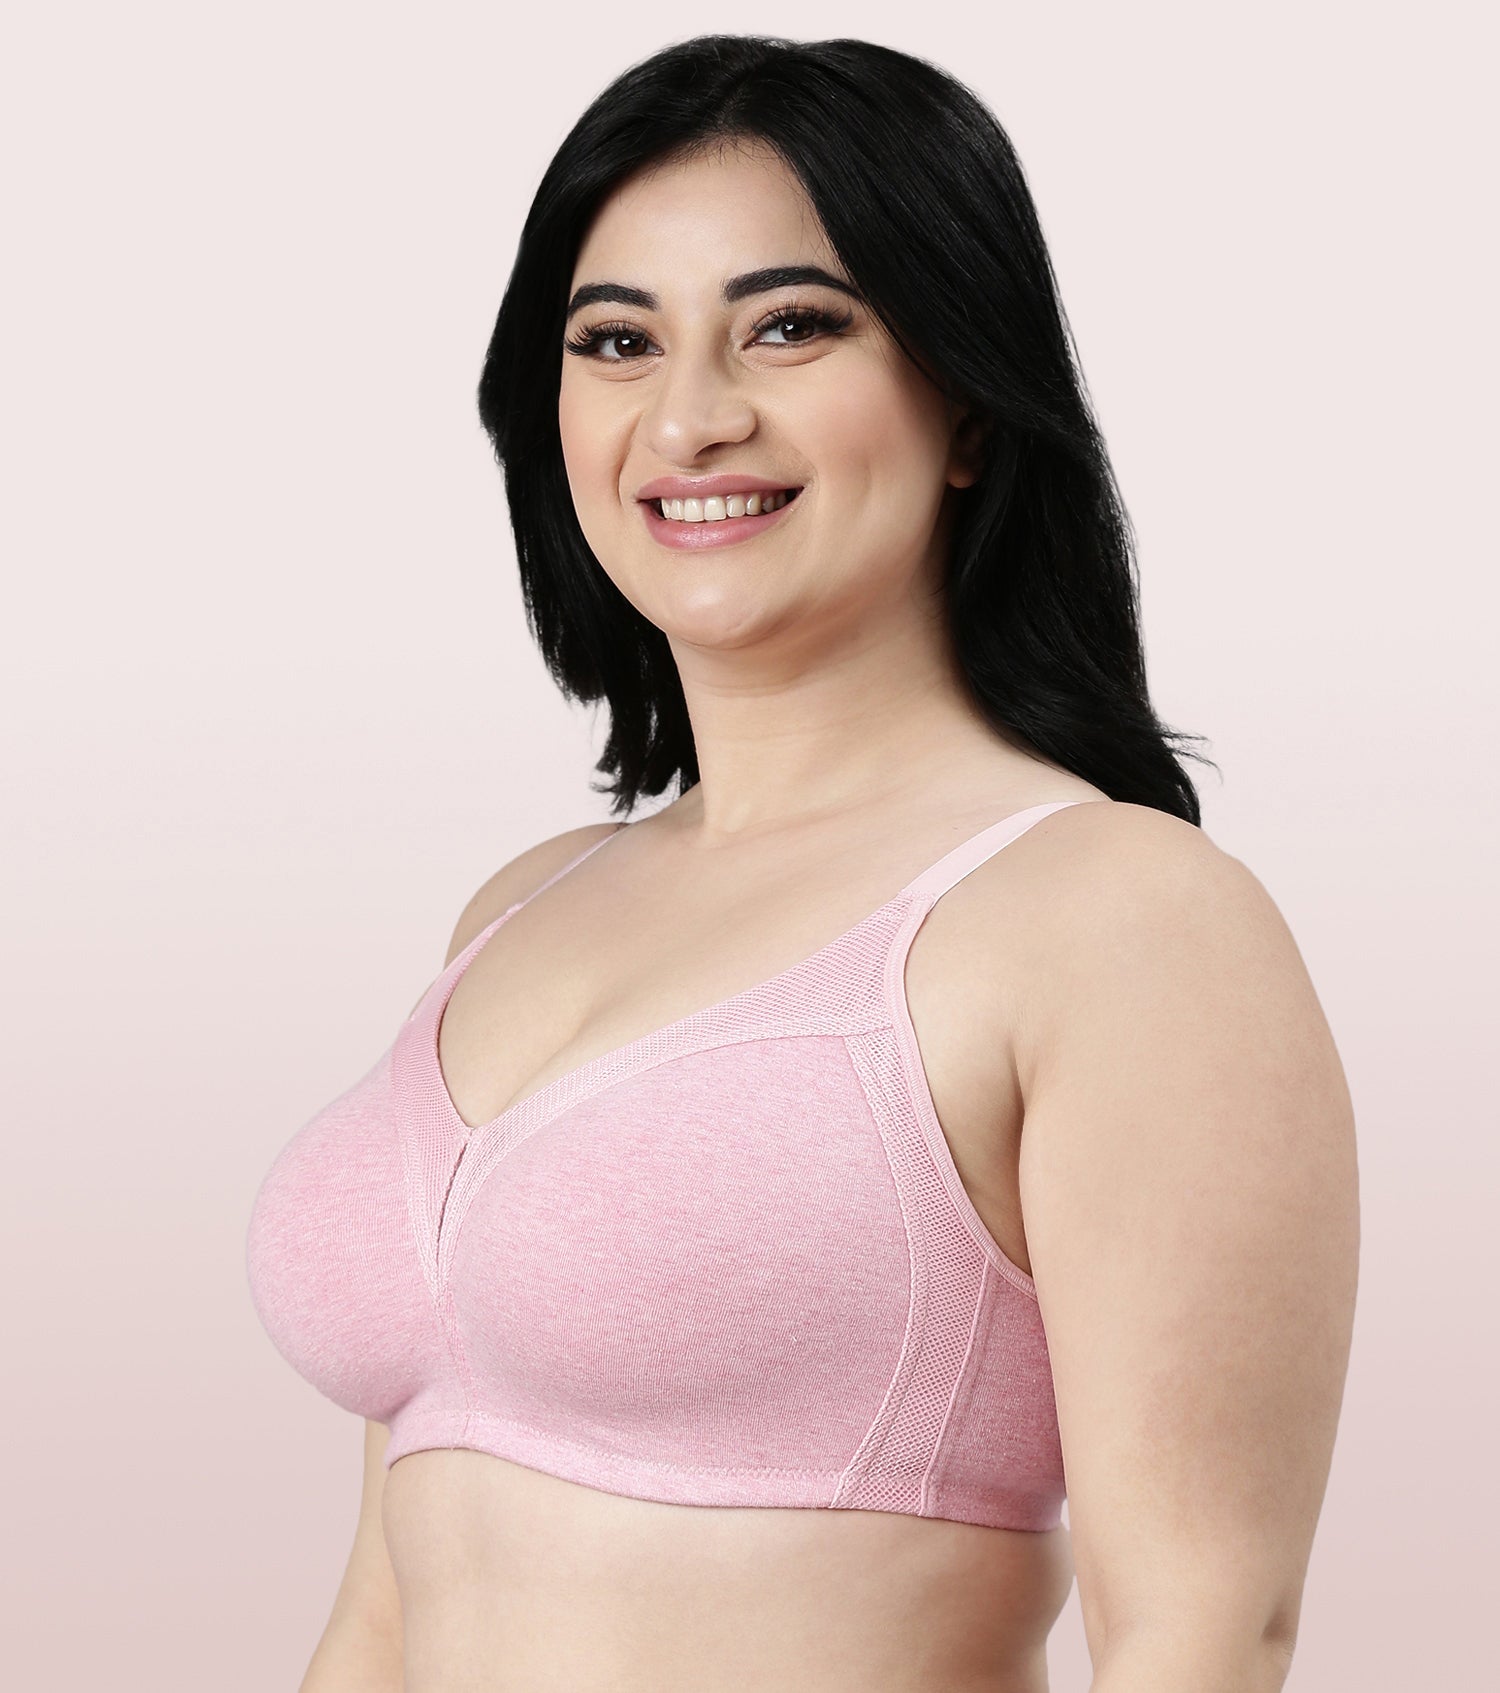 MM Store - Padded bra in different colors Size 36 to 42 Price 650 only